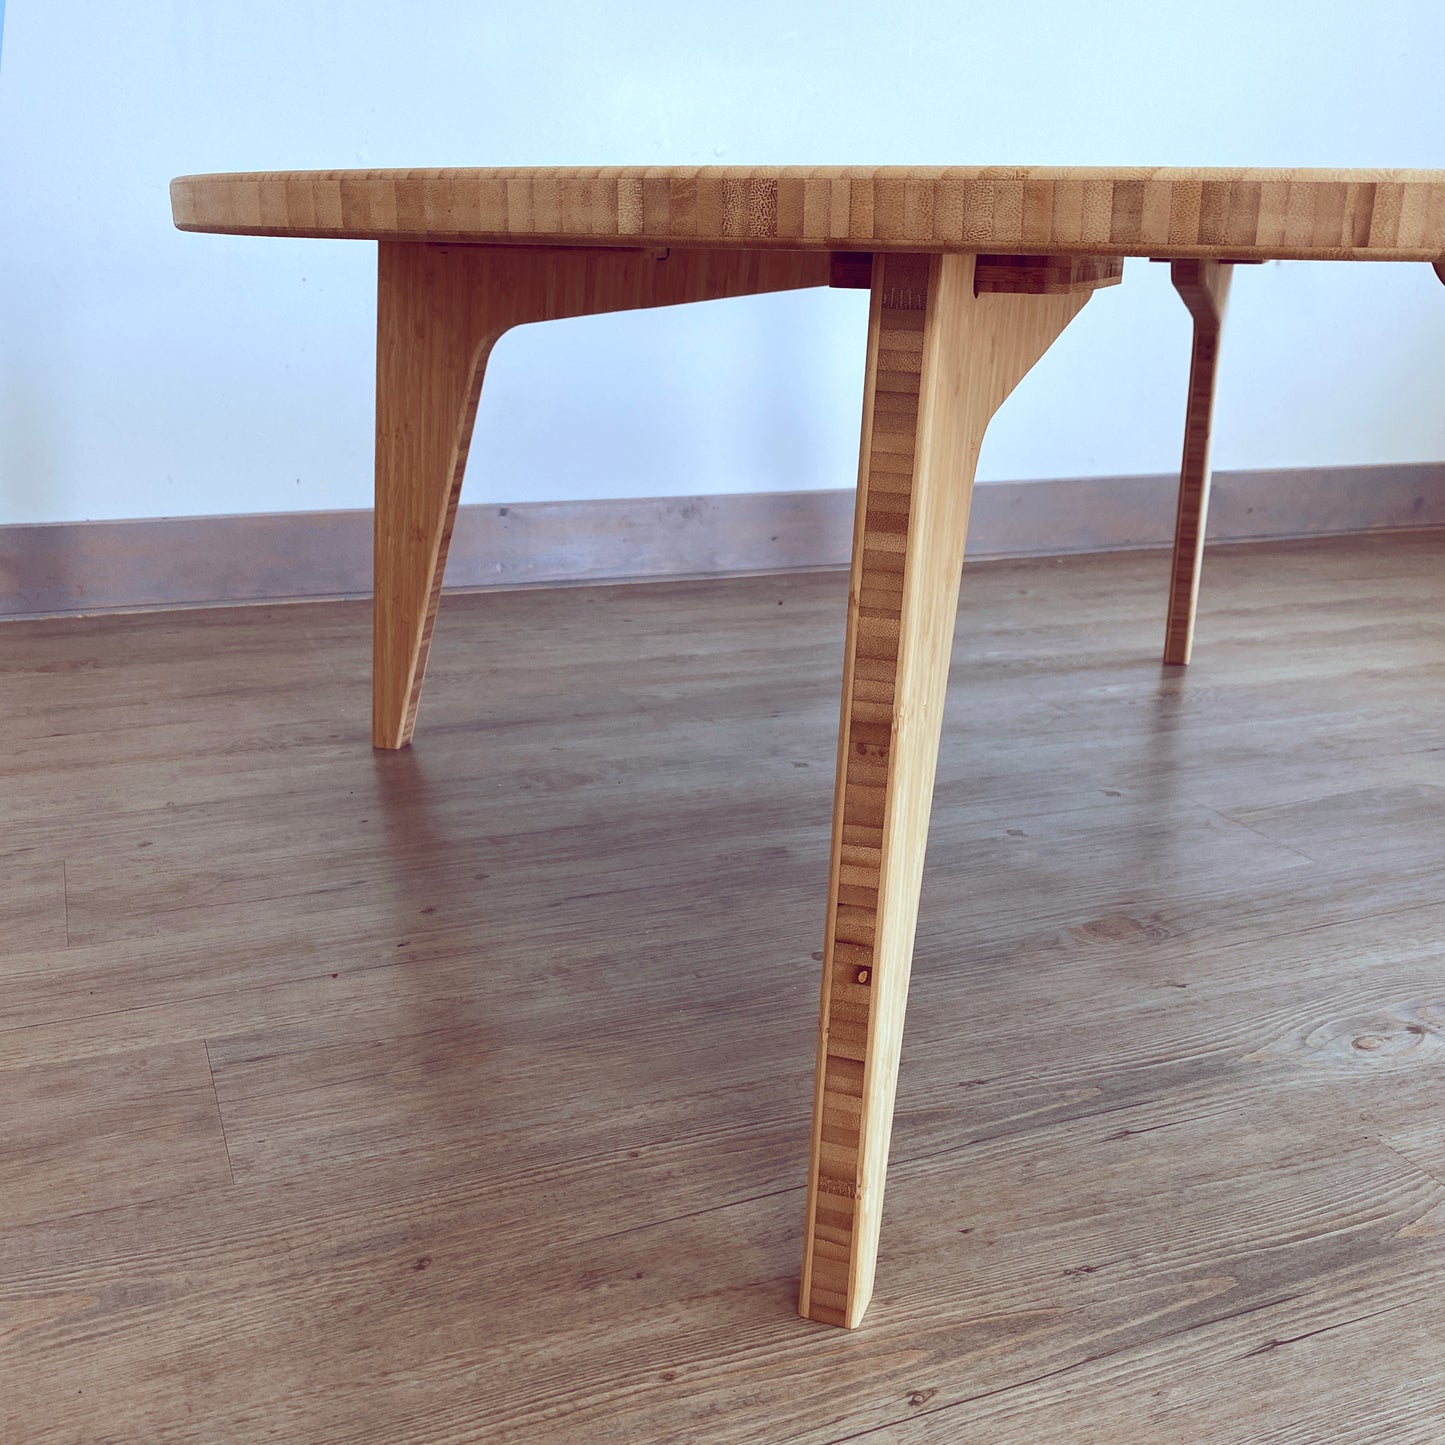 LOW Round Coffee Table: Natural Bamboo - Large